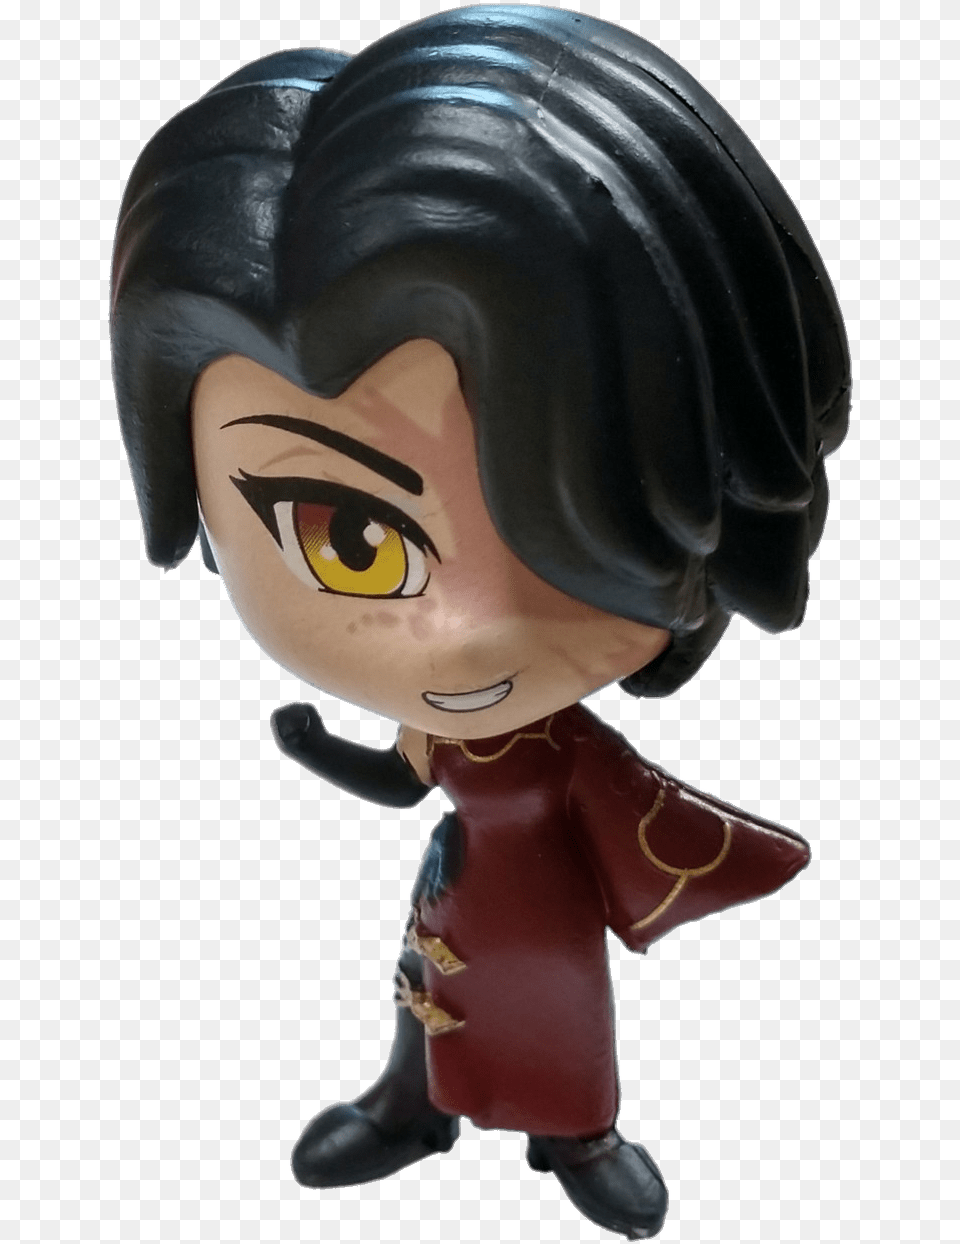 Rwby Cinder Fall Figurine Rwby Cinder Fall Figure, Baby, Person, Face, Head Png